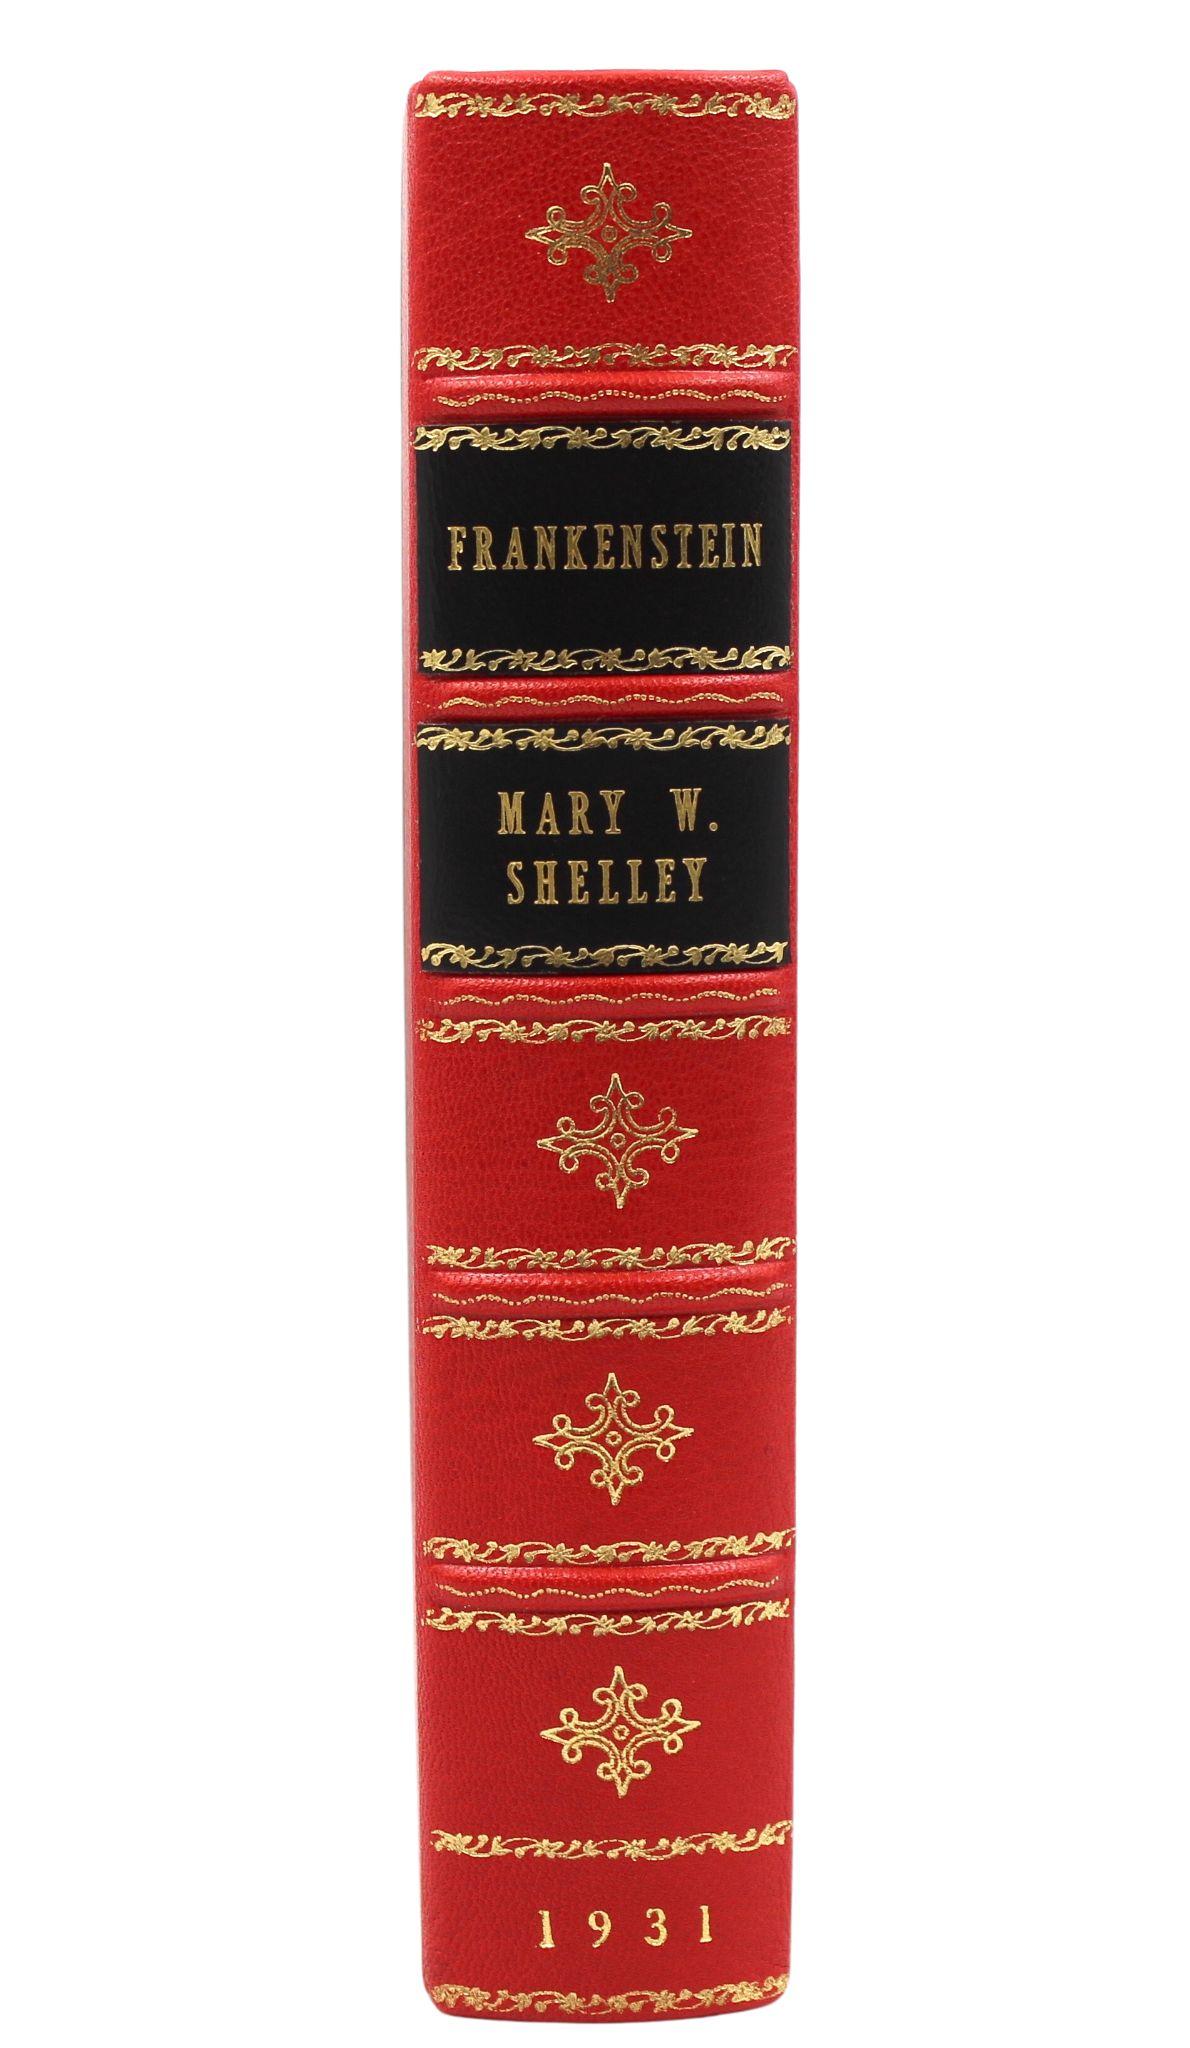 Frankenstein by Mary W. Shelley, Photoplay Grosset & Dunlap Edition, 1931 For Sale 10